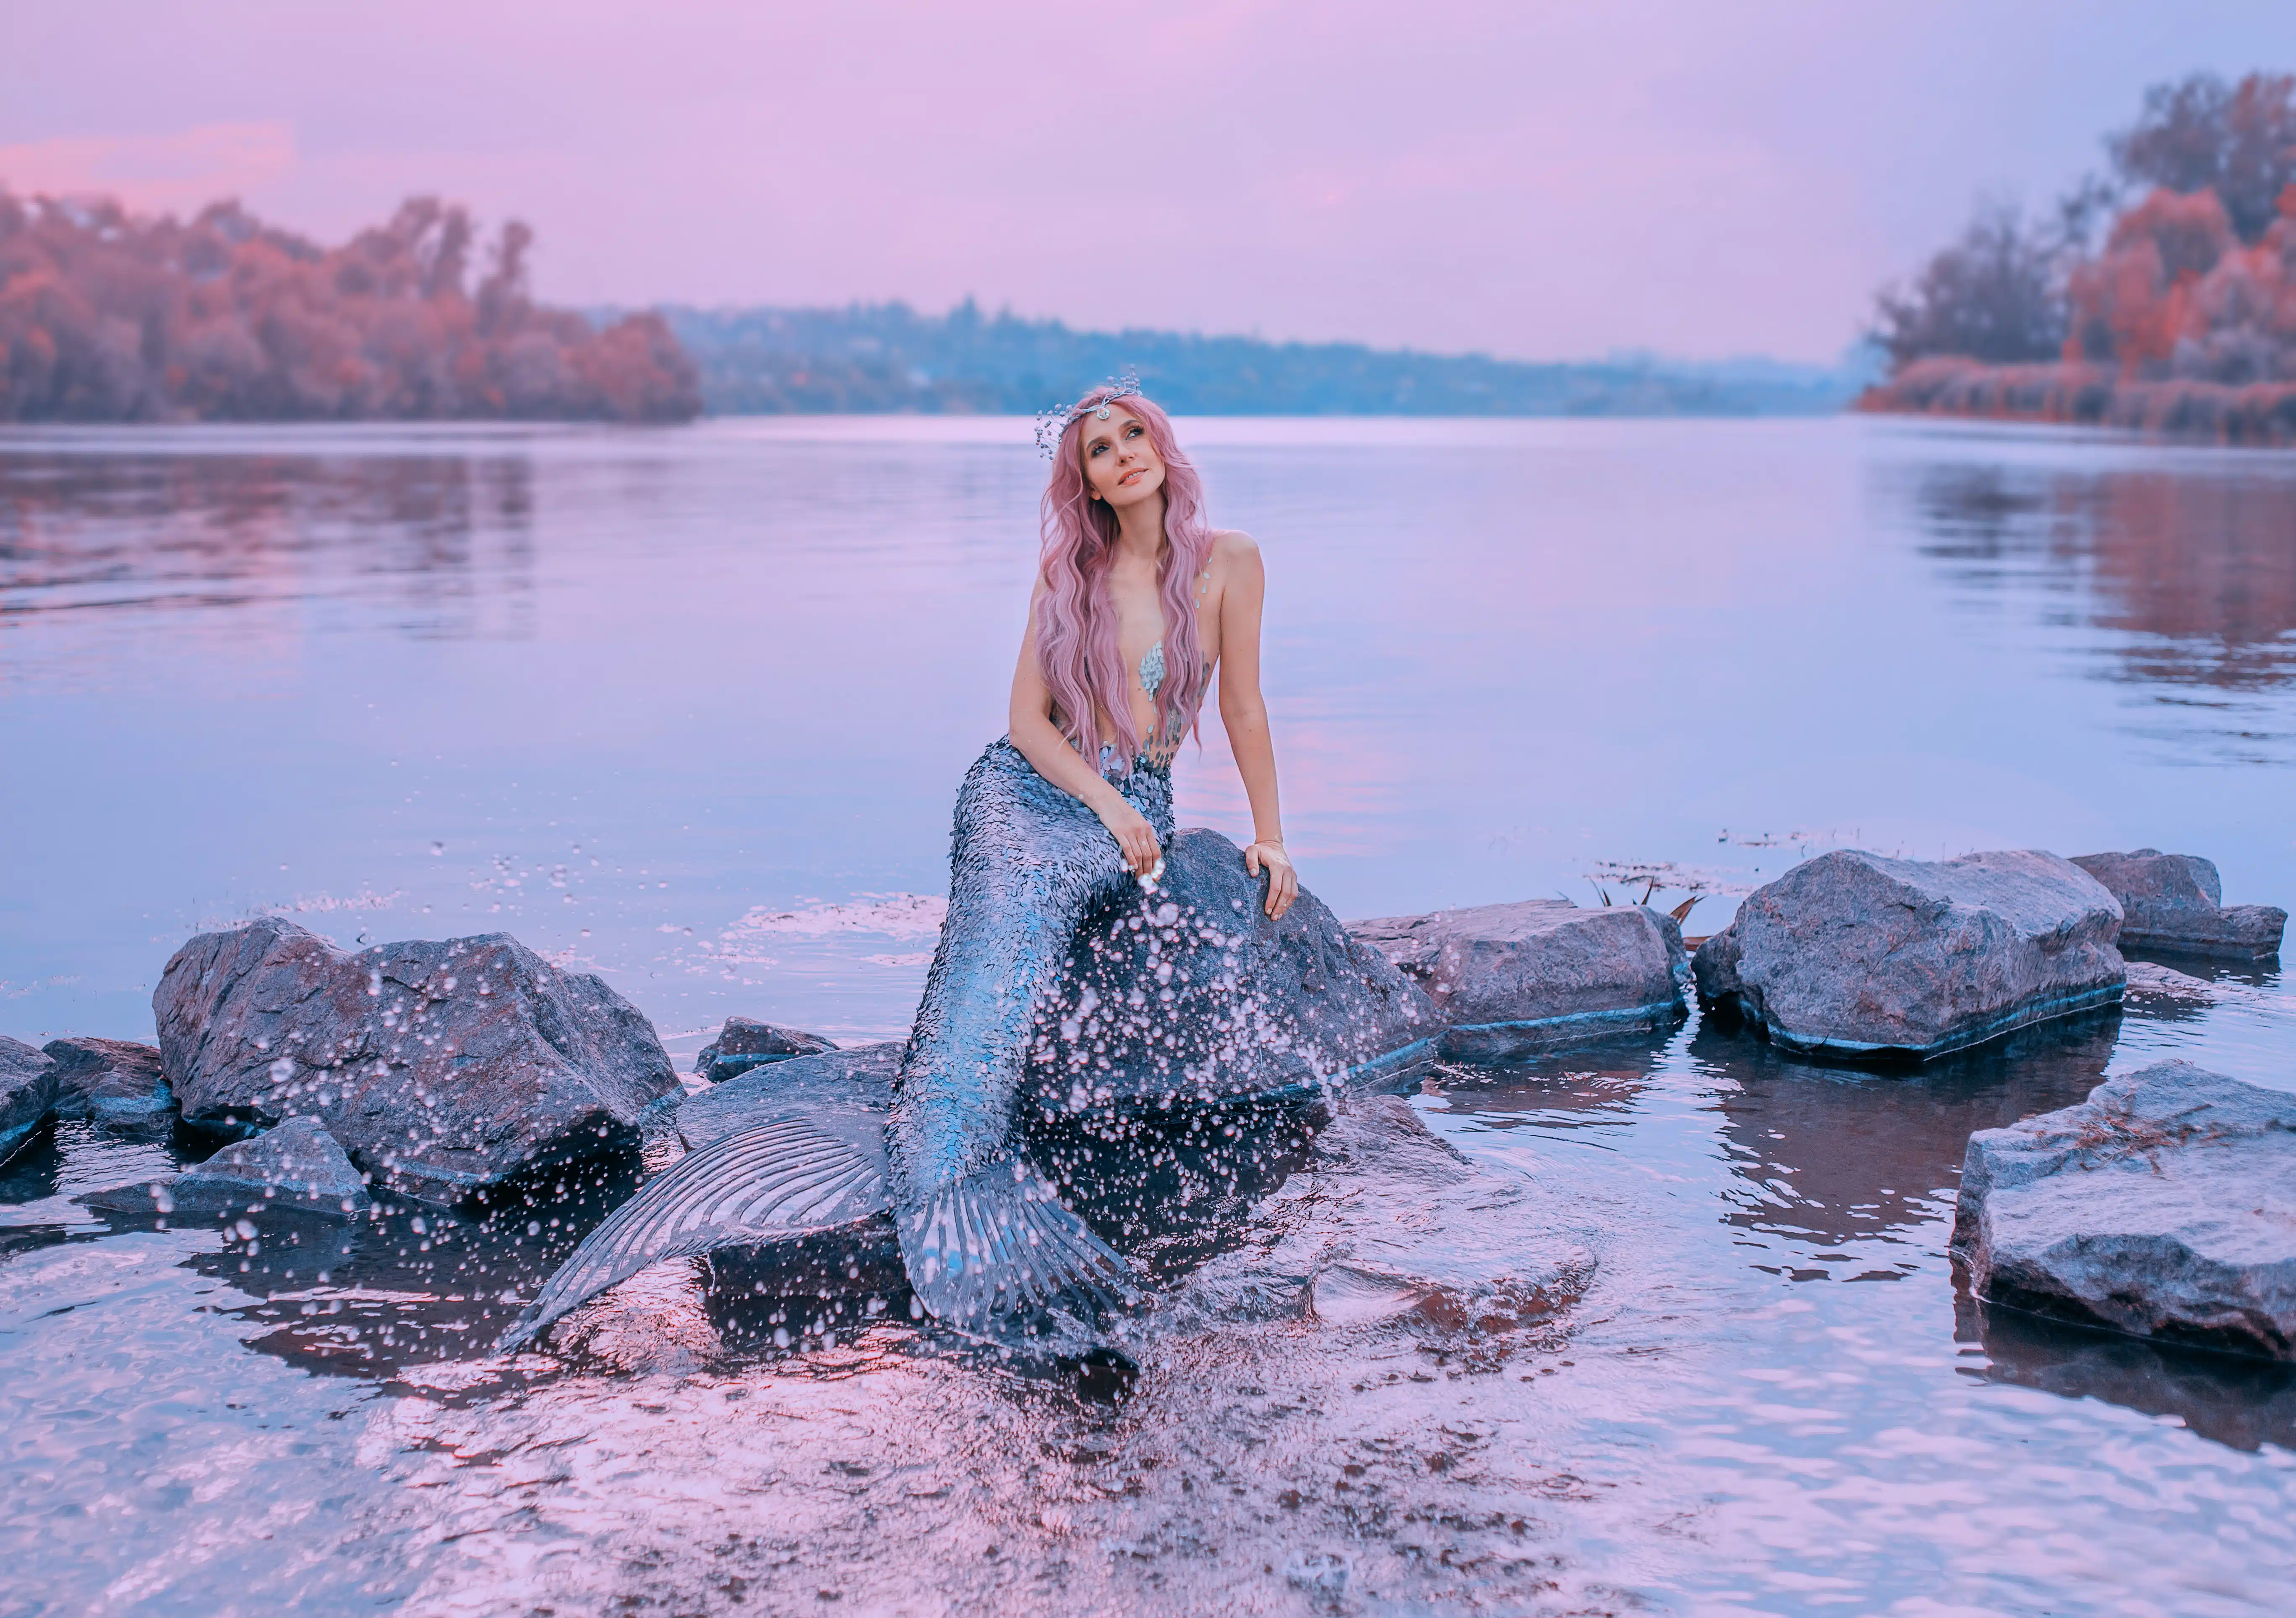 mermaid sea queen with pink long hair dreamily looks at purple sky with splashes of water around her tail